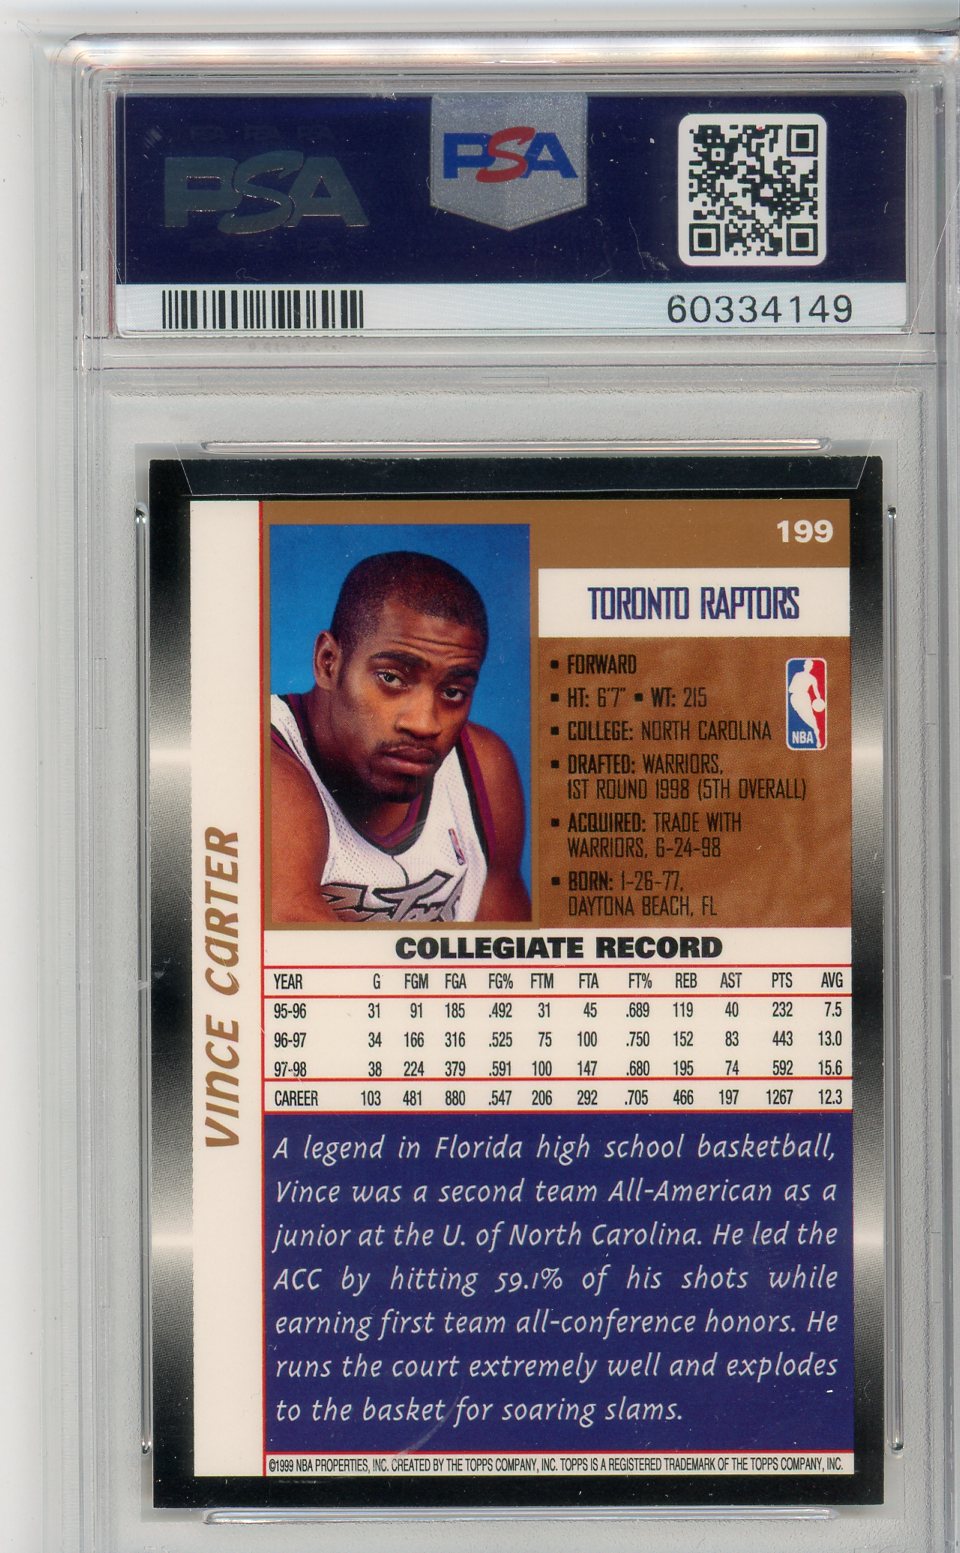 1998 Topps Vince Carter #199 Graded Rookie Card PSA 9